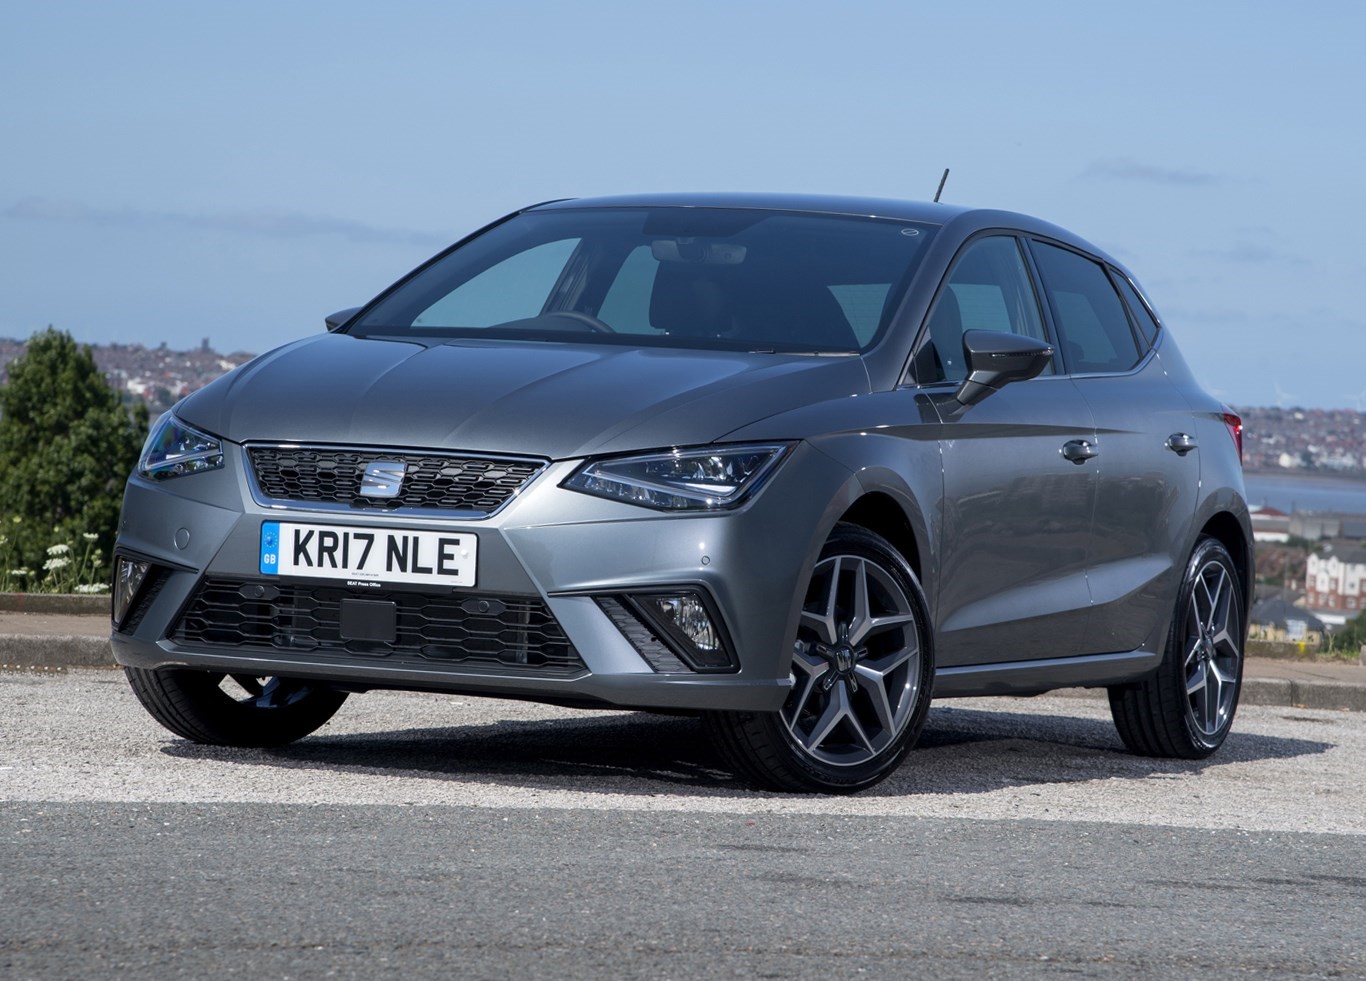 Ibiza diesel is very have the edge over petrol version, road test | Company Car Reviews